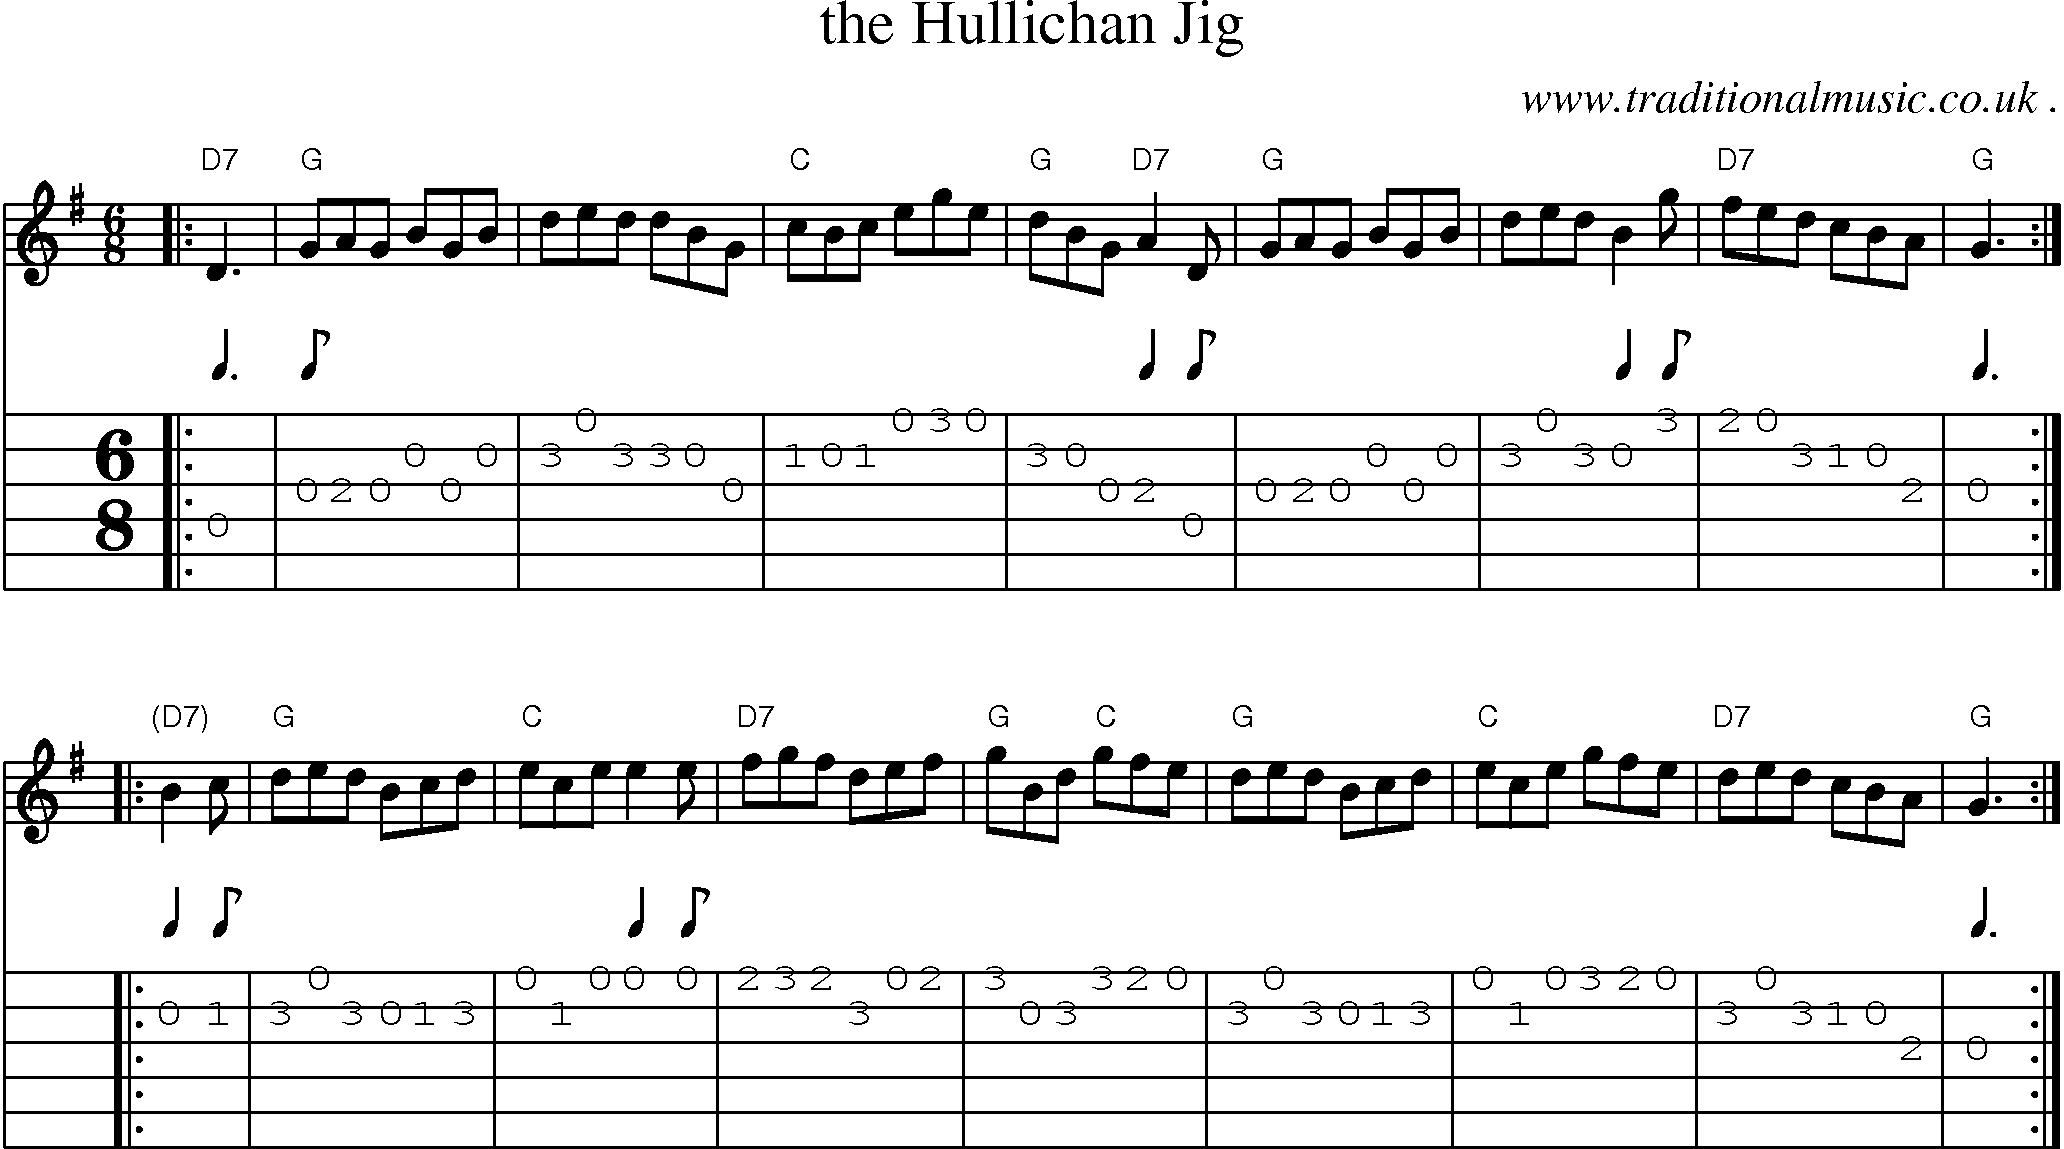 Sheet-music  score, Chords and Guitar Tabs for The Hullichan Jig